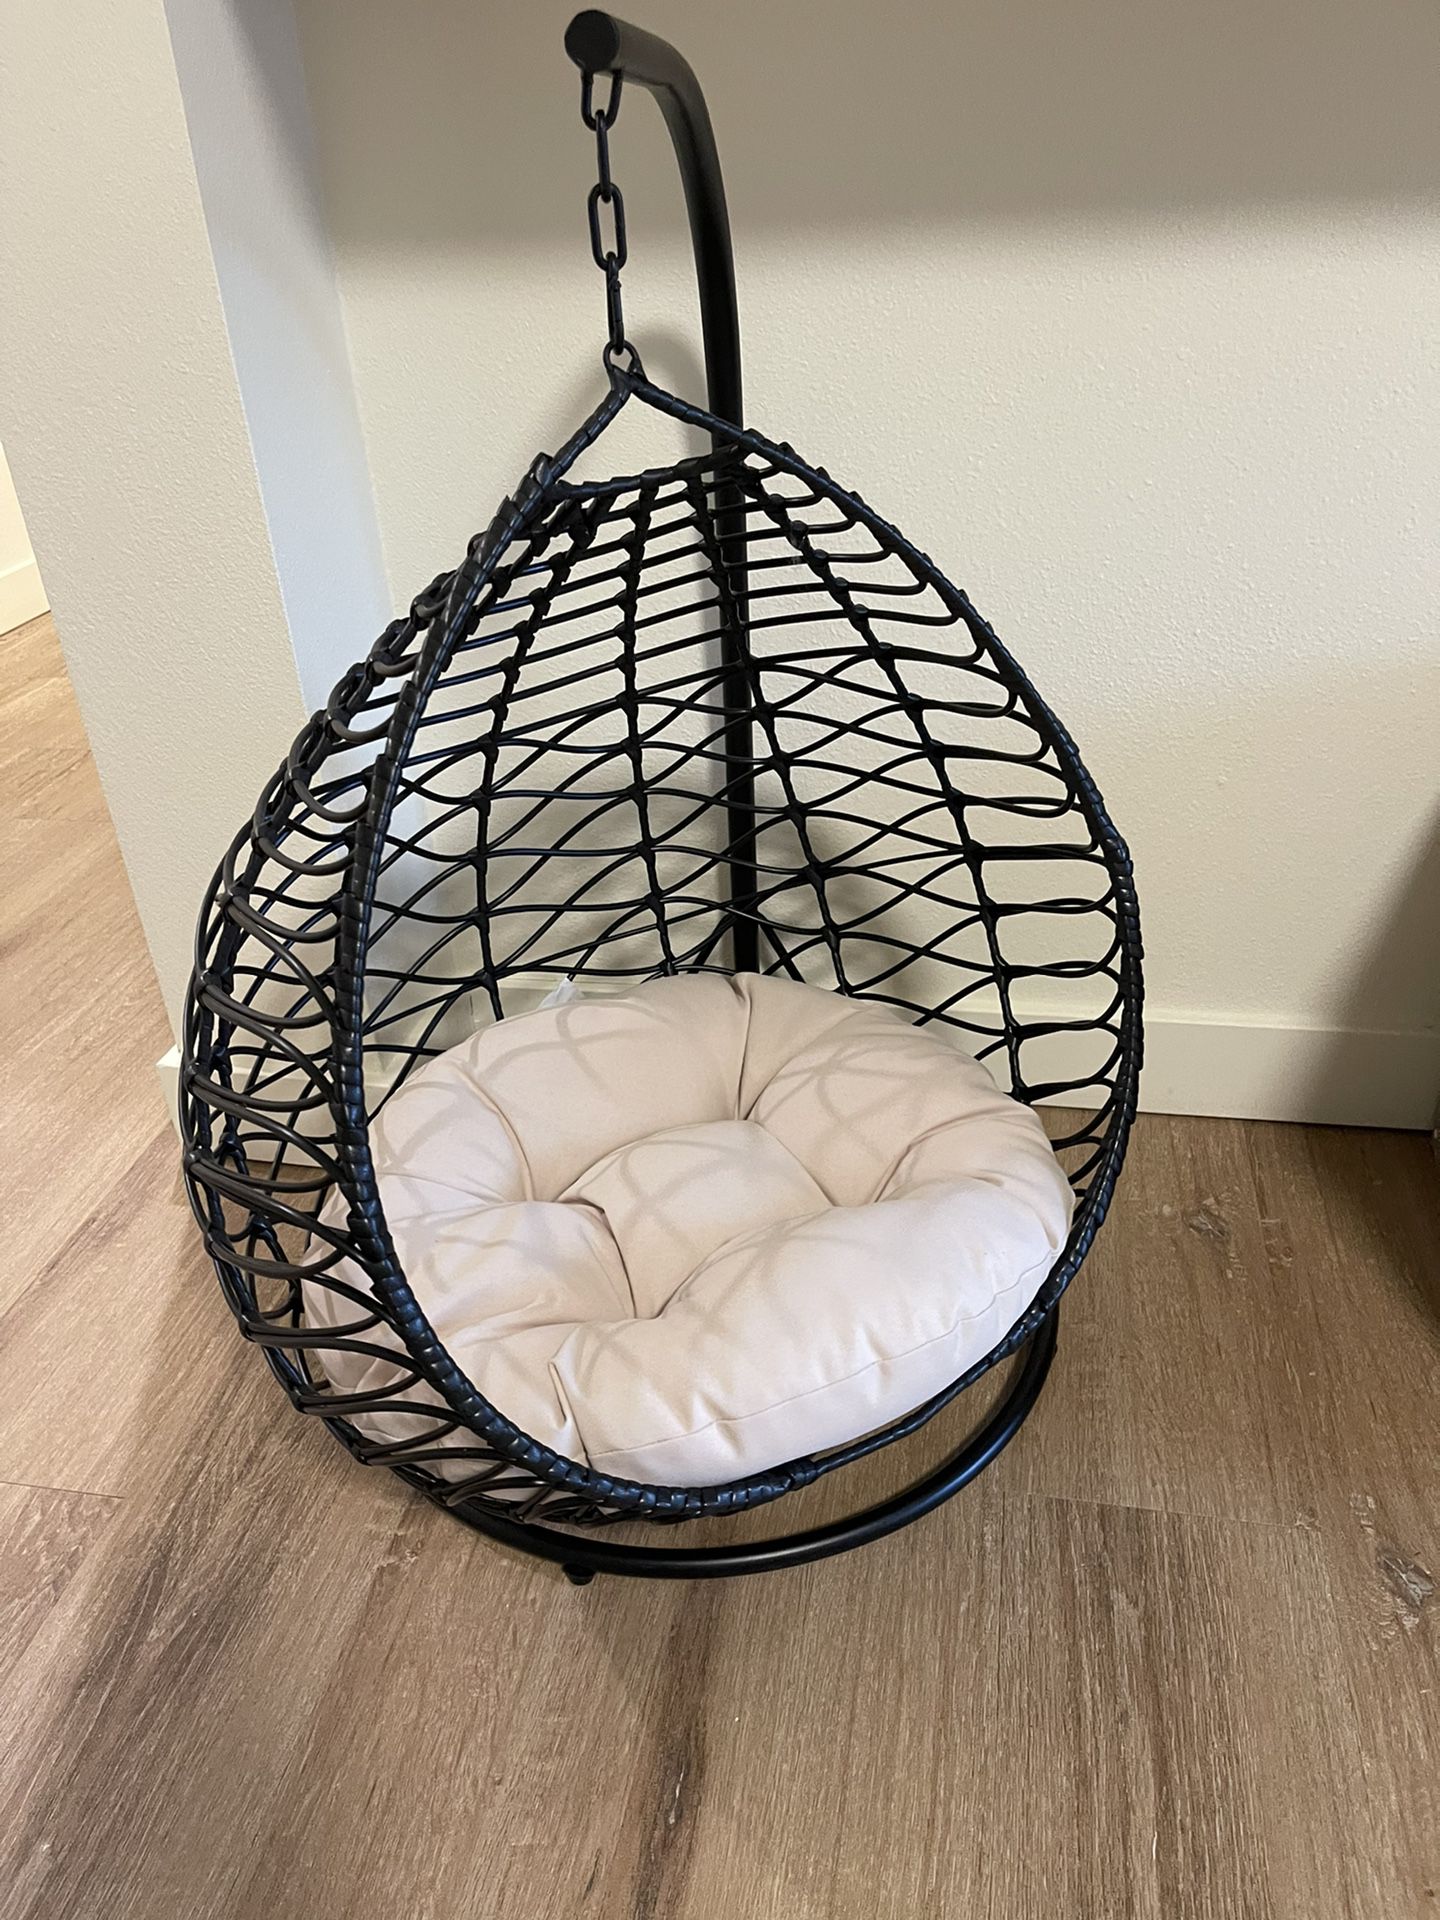 New swing for cats